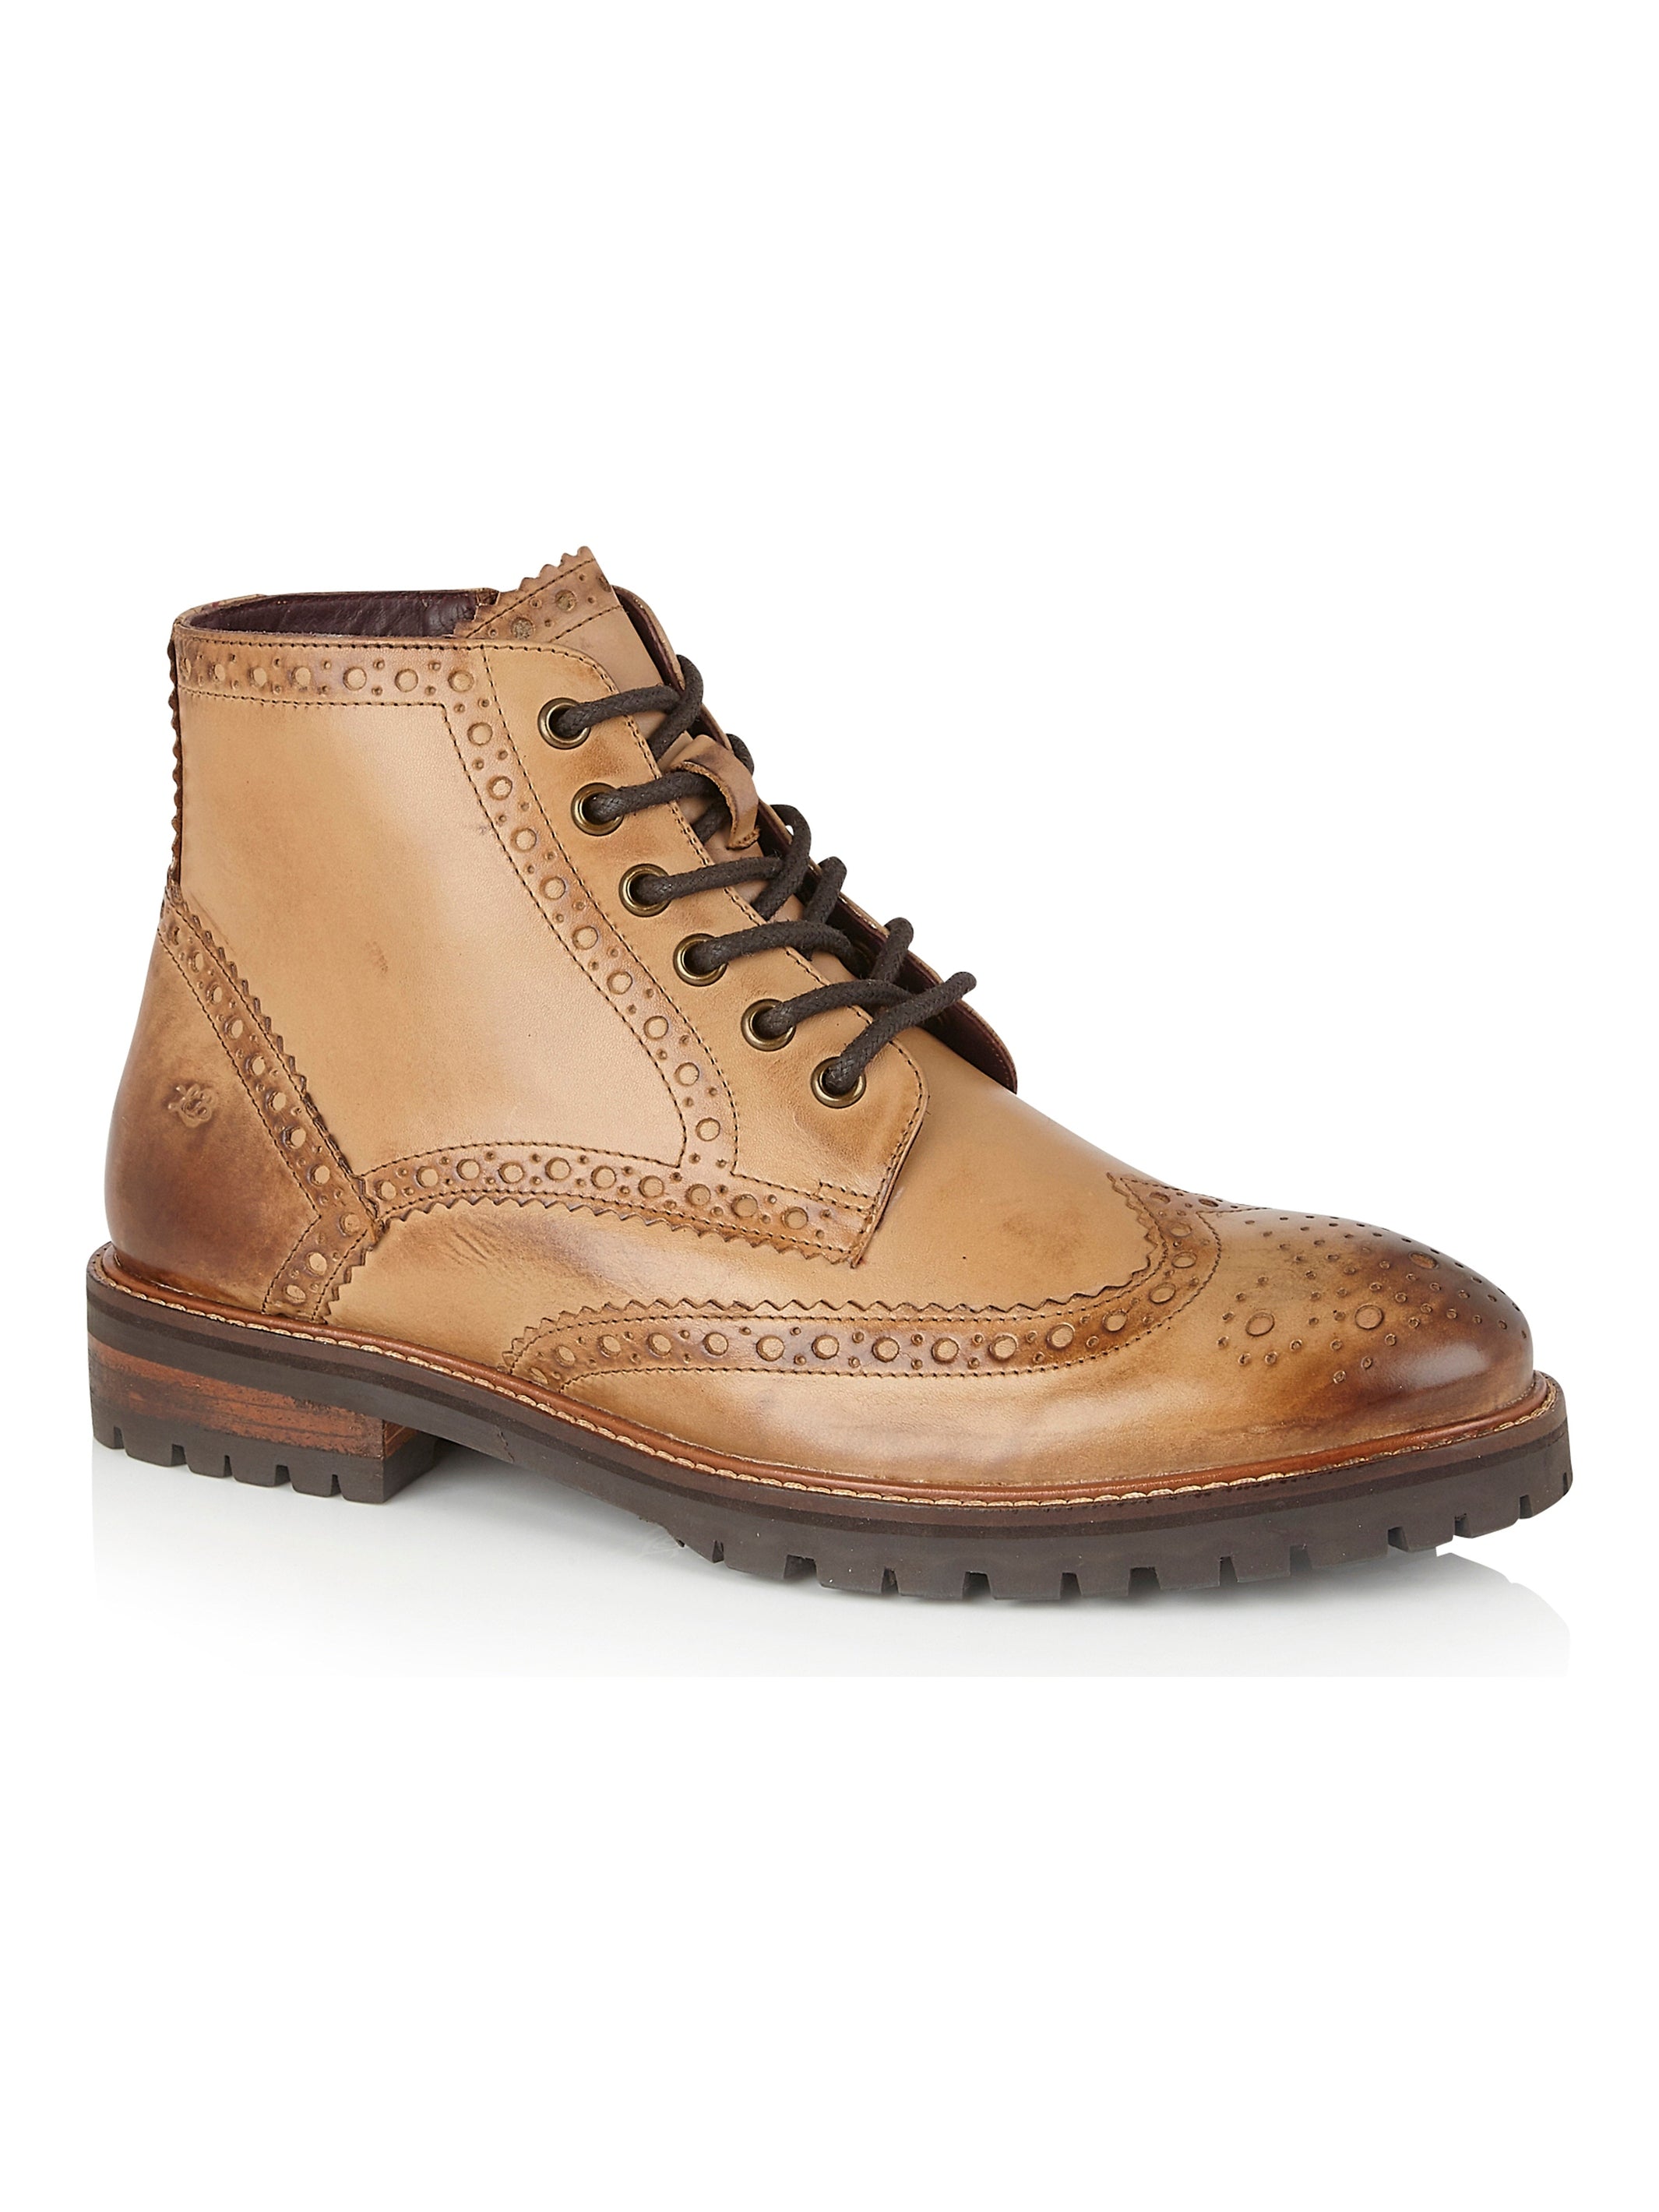 LACE UP DERBY BROGUE BOOTS IN TAN